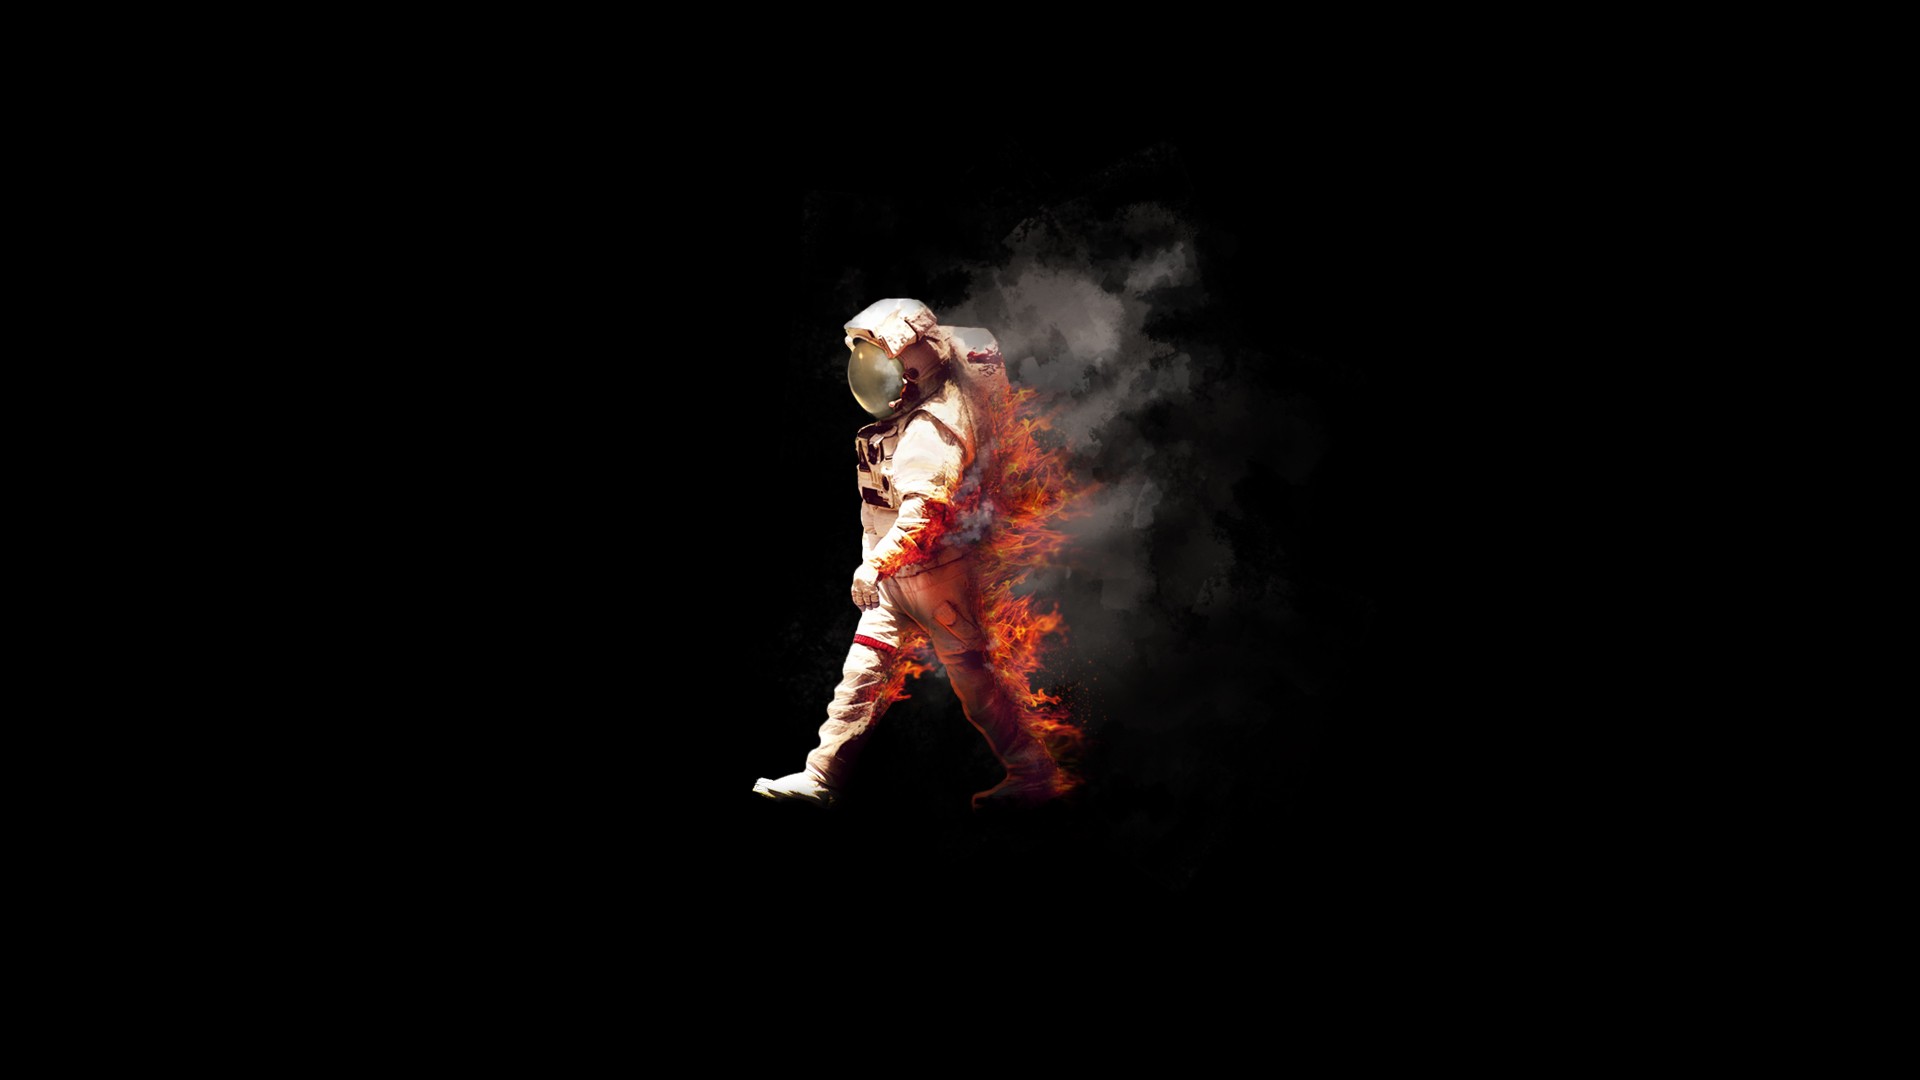 astronaut, Space, Fire, Burn, Spacesuit, NASA, Spaceman, Minimalism, Abstract, Burning Wallpaper